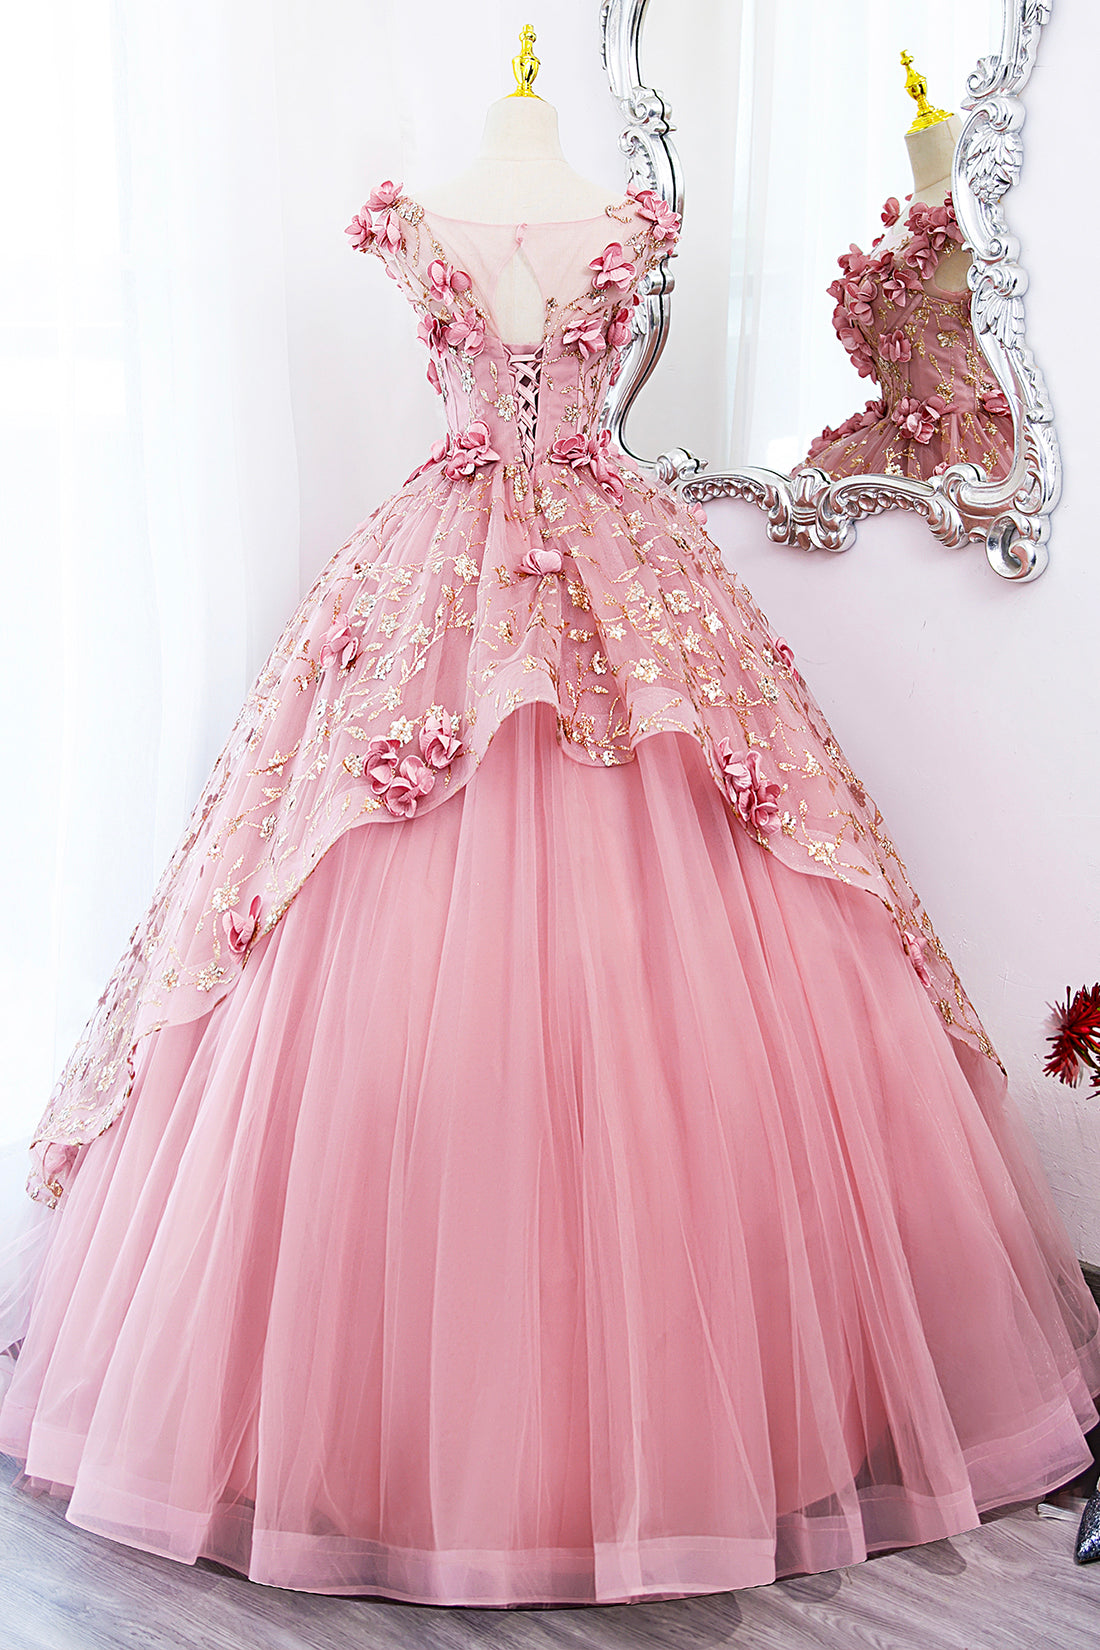 Beautiful Pink Tulle Long Prom Dress with Flowers, Lovely Tulle Sweet 16 Dress